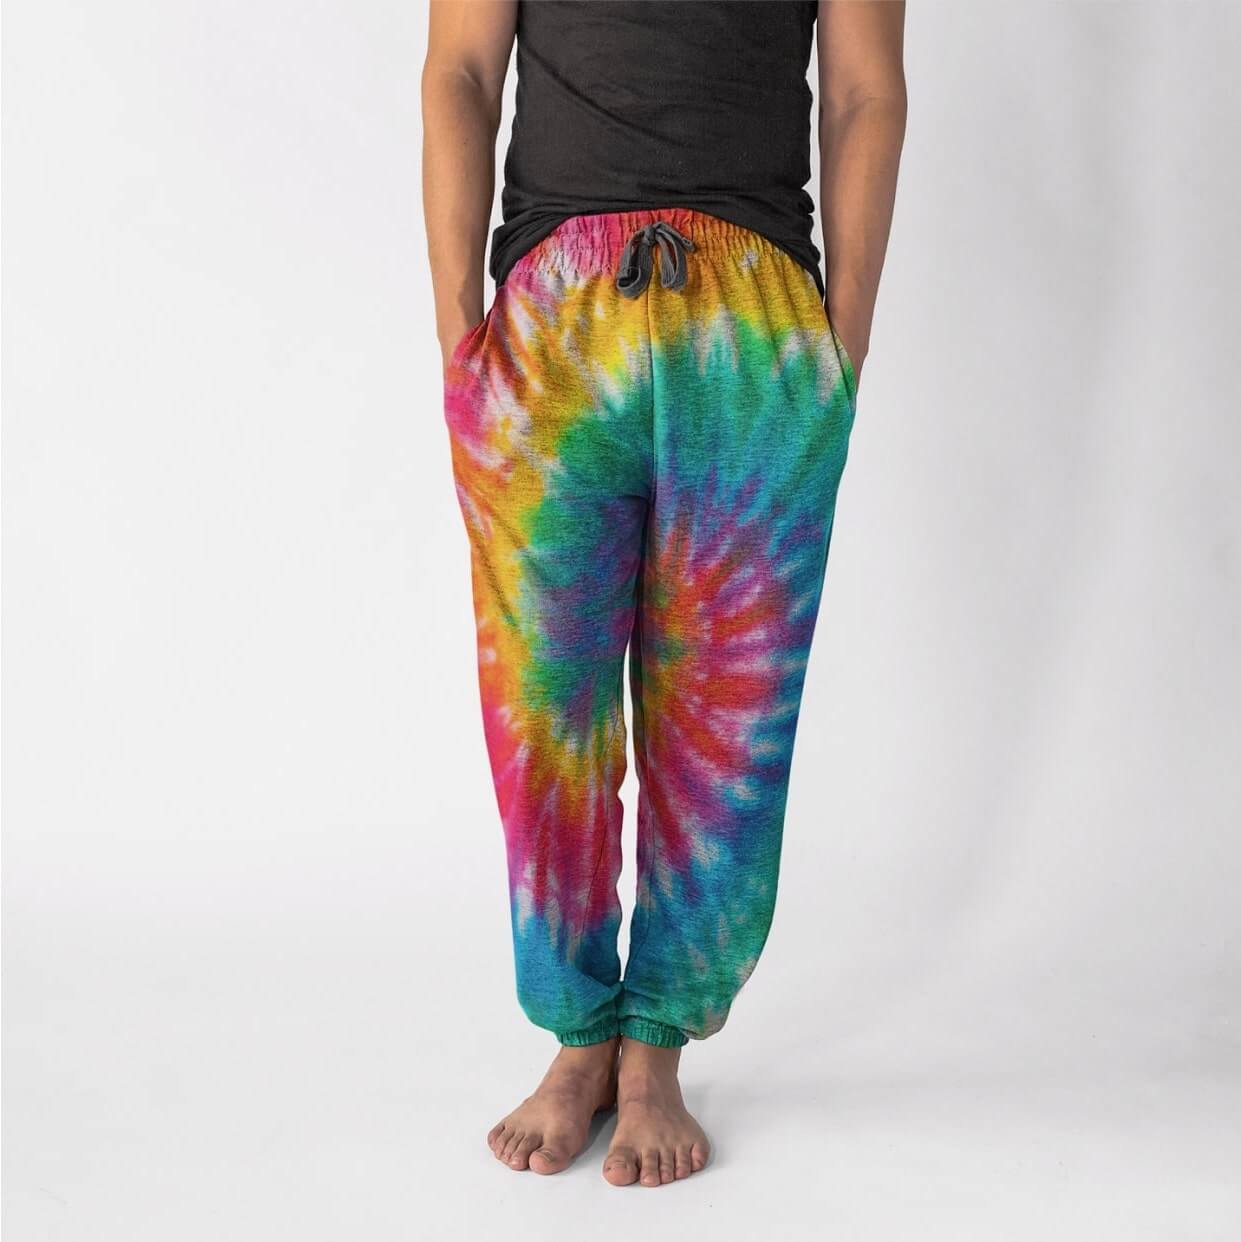 A barefoot man wearing a black t-shirt and colorful tie-dye jogger pants with a pattern resembling a rainbow